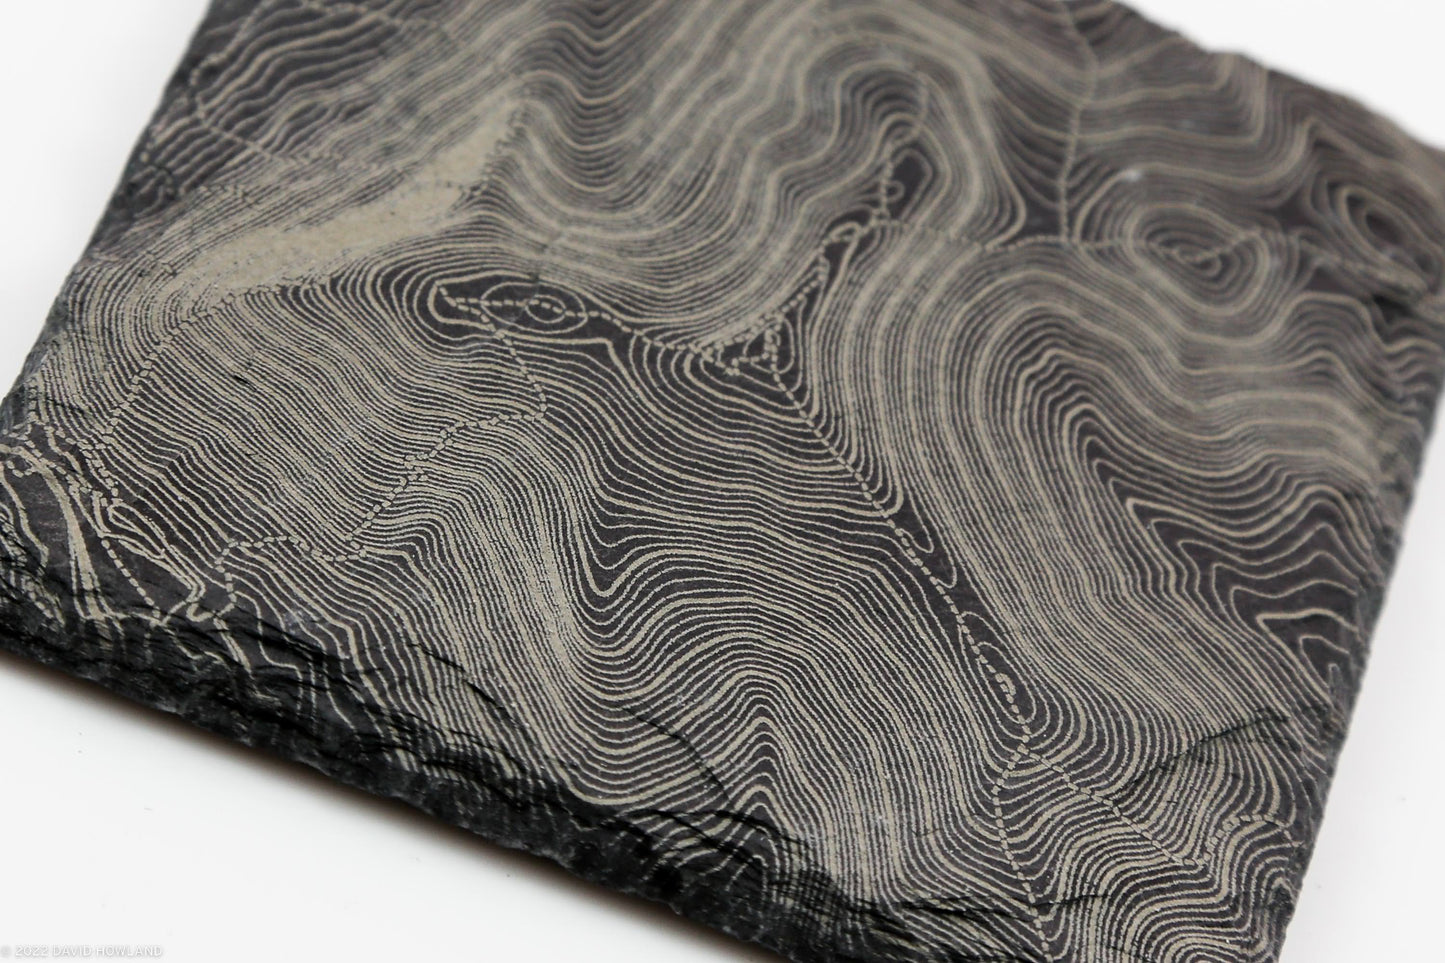 Mount Cabot Topographic Map Slate Coaster